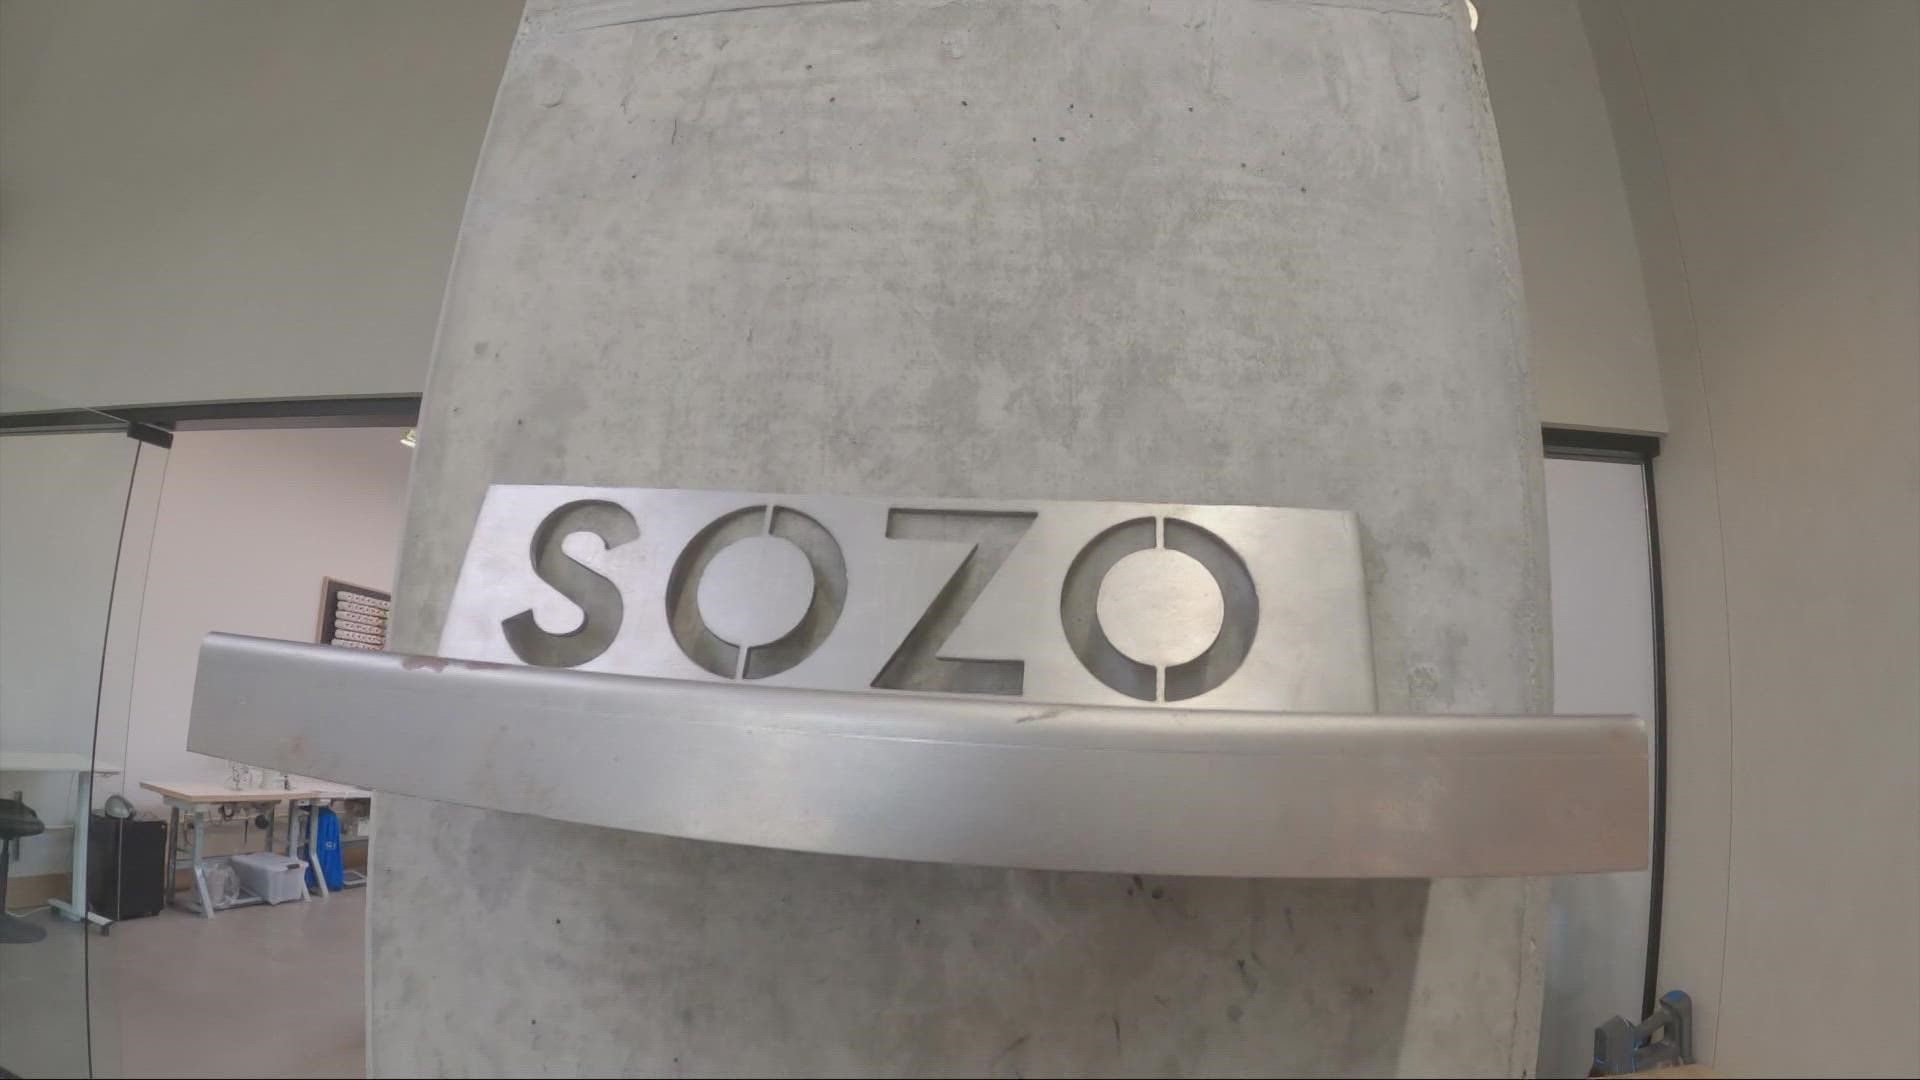 3News'  Kierra Cotton took a first look inside Sozo, and discussed the brand's origin with CEO Todd Leebow.